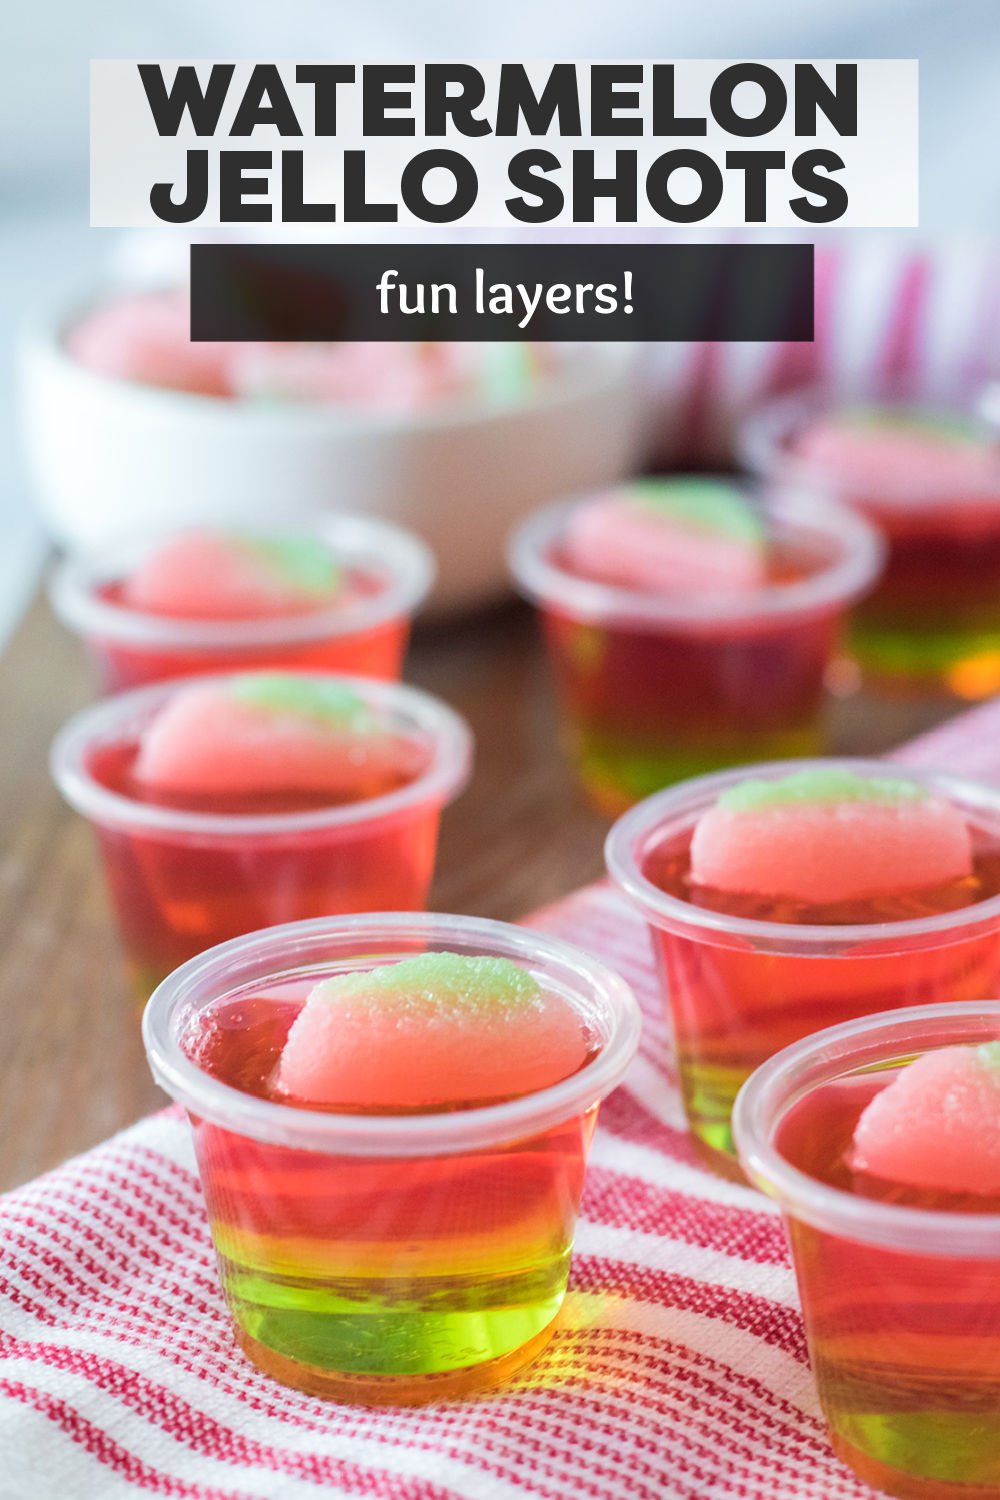 These easy layered watermelon jello shots are so good! Green and pink jello give these shots their watermelon look with a sour watermelon candy on top for fun! Perfect for a warm weather treat. | www.persnicketyplates.com